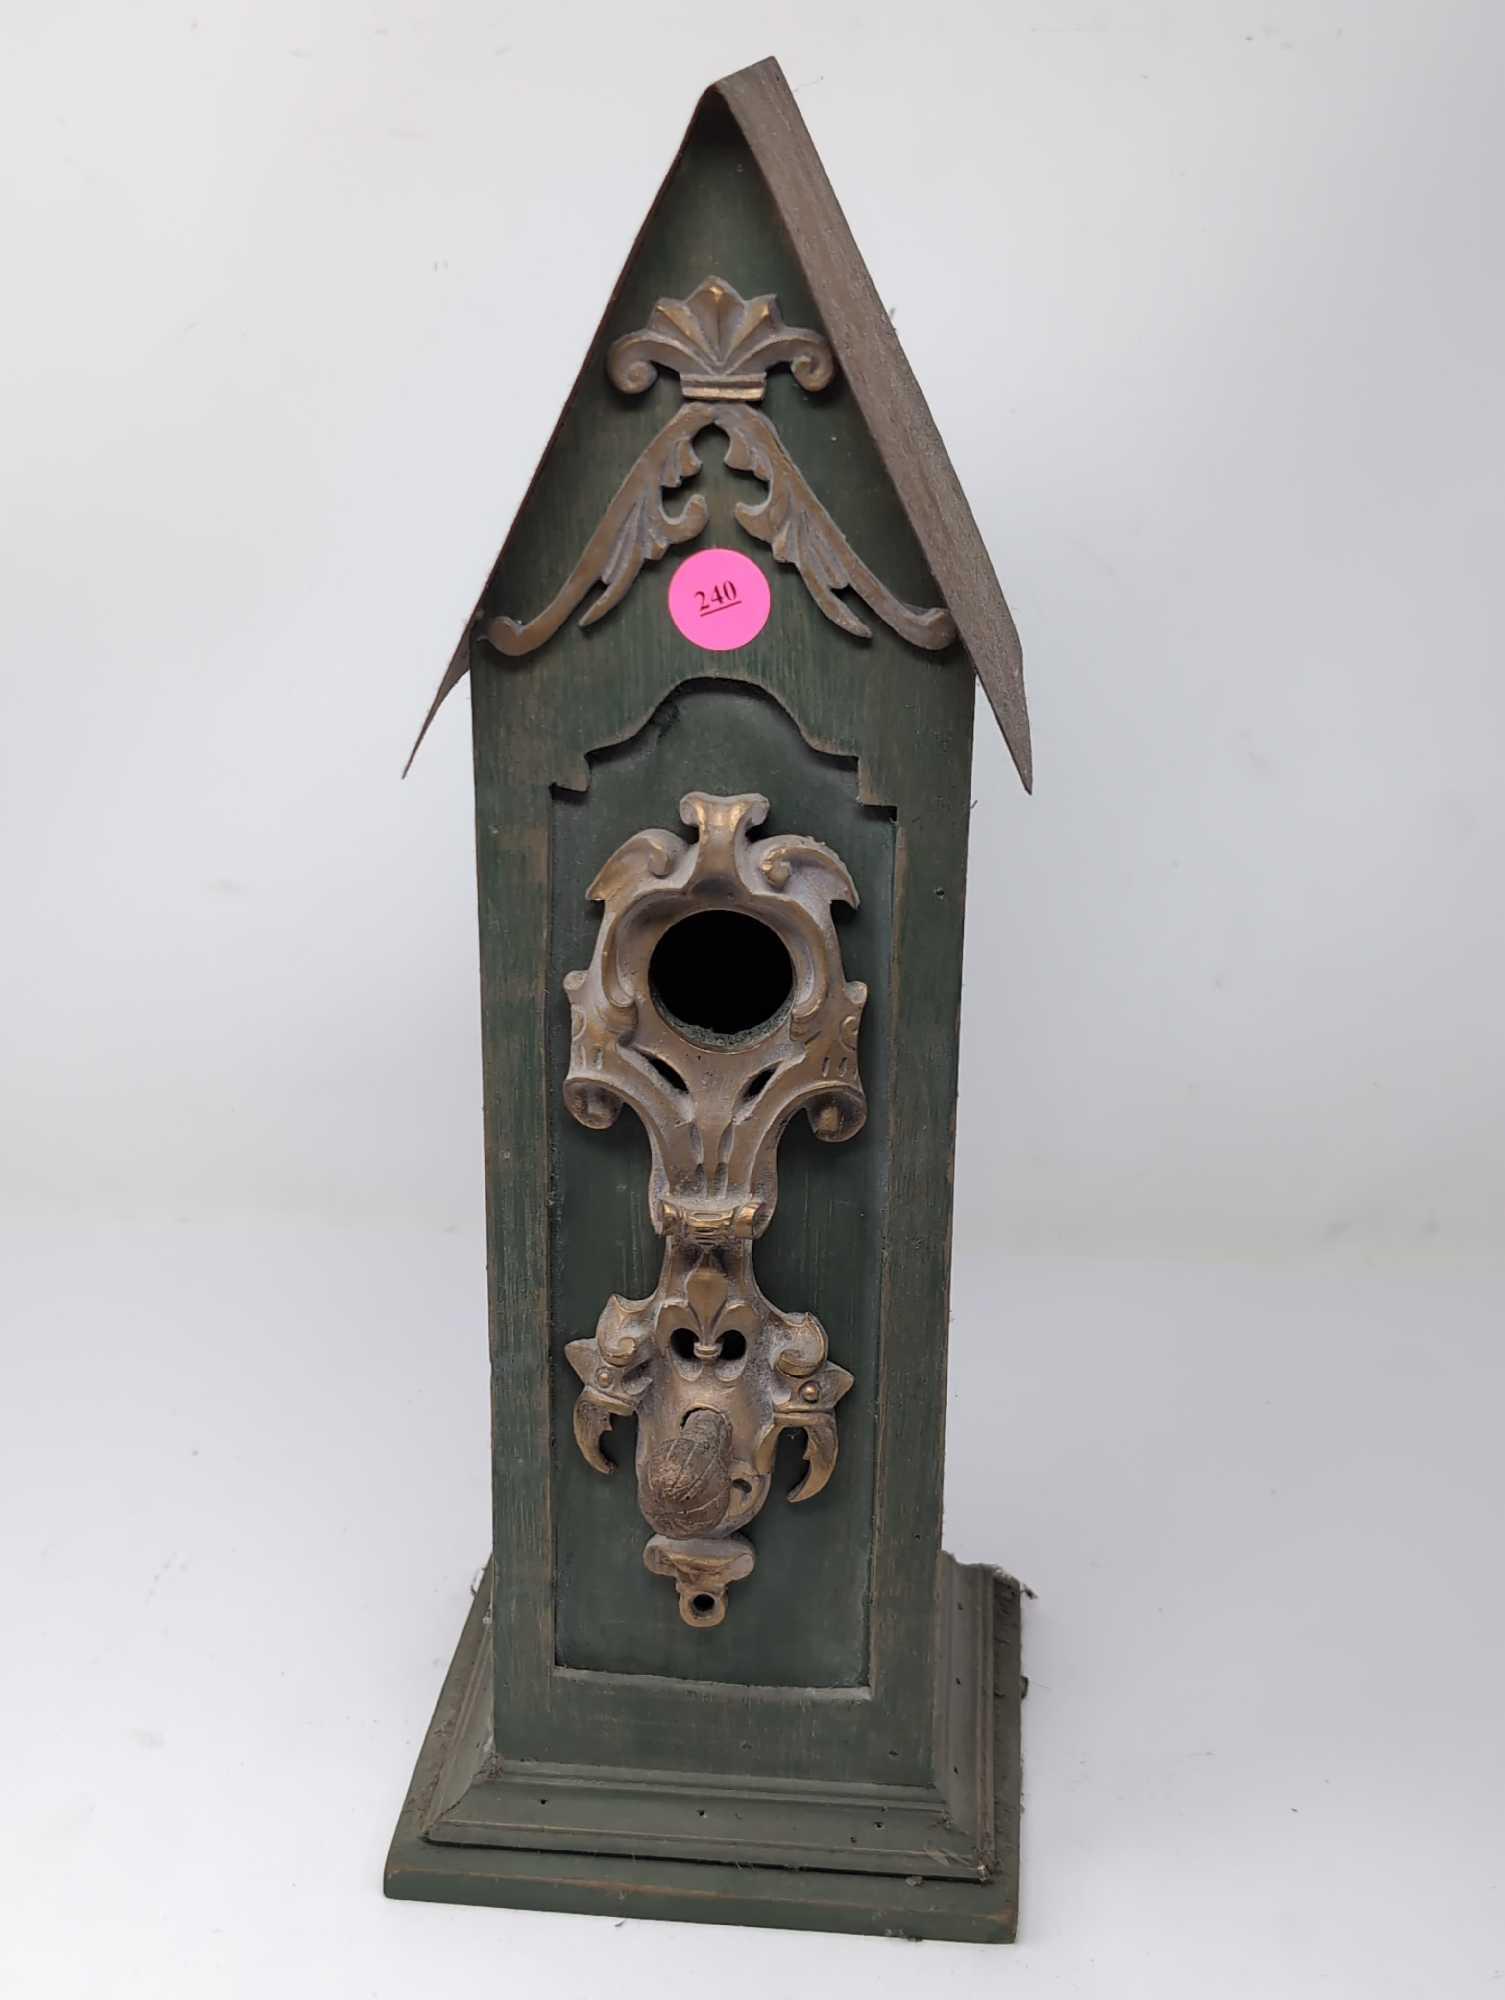 (LR) COUNTRY THEMED GREEN WOOD BIRD HOUSE WITH GOLD DETAILED ENTRYWAY AND TIN ROOF. IT MEASURES